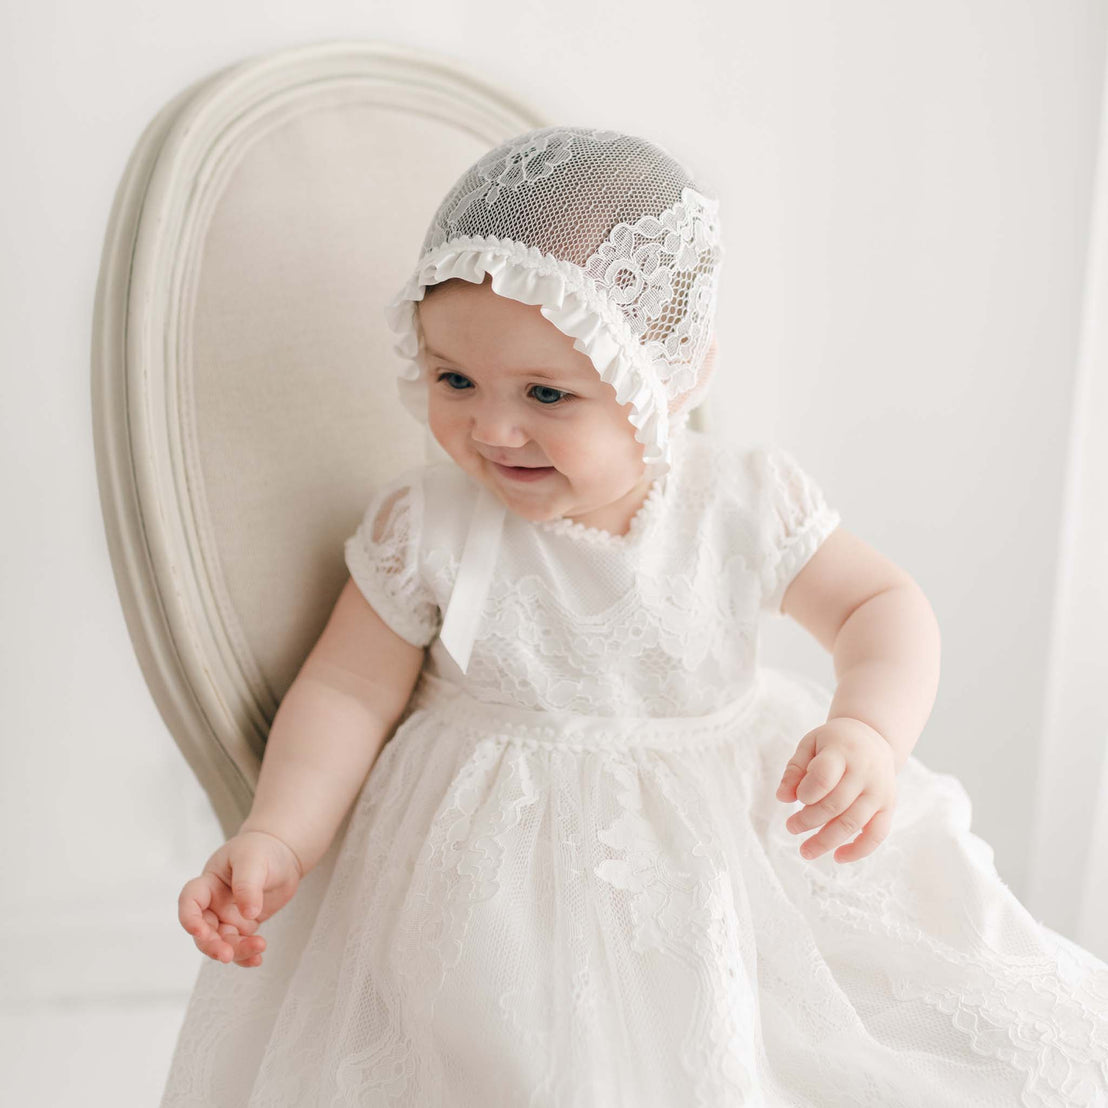 A baby wearing the Victoria Puff Sleeve Christening Gown and Bonnet sits on a cream-colored upholstered chair. The gown is made with embroidered ivory floral lace and silk Dupioni lining. The baby is smiling and looking to the side. The background is softly lit and white.